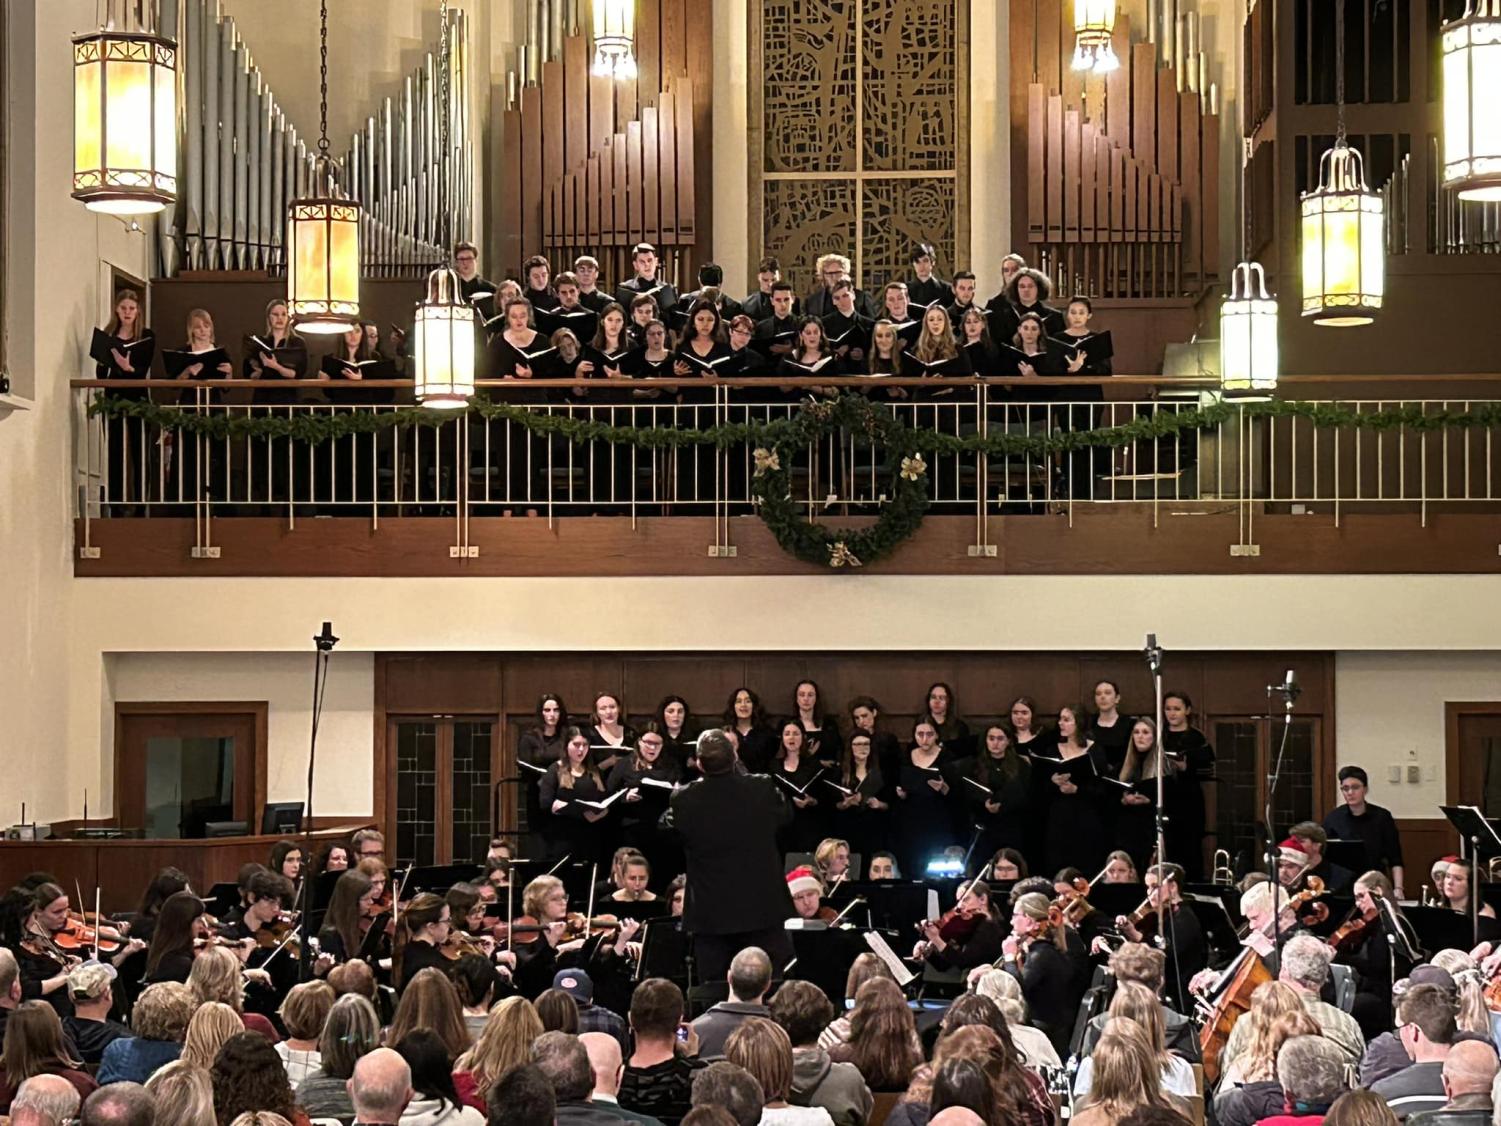 UWL music students speak on the value of music during the holidays